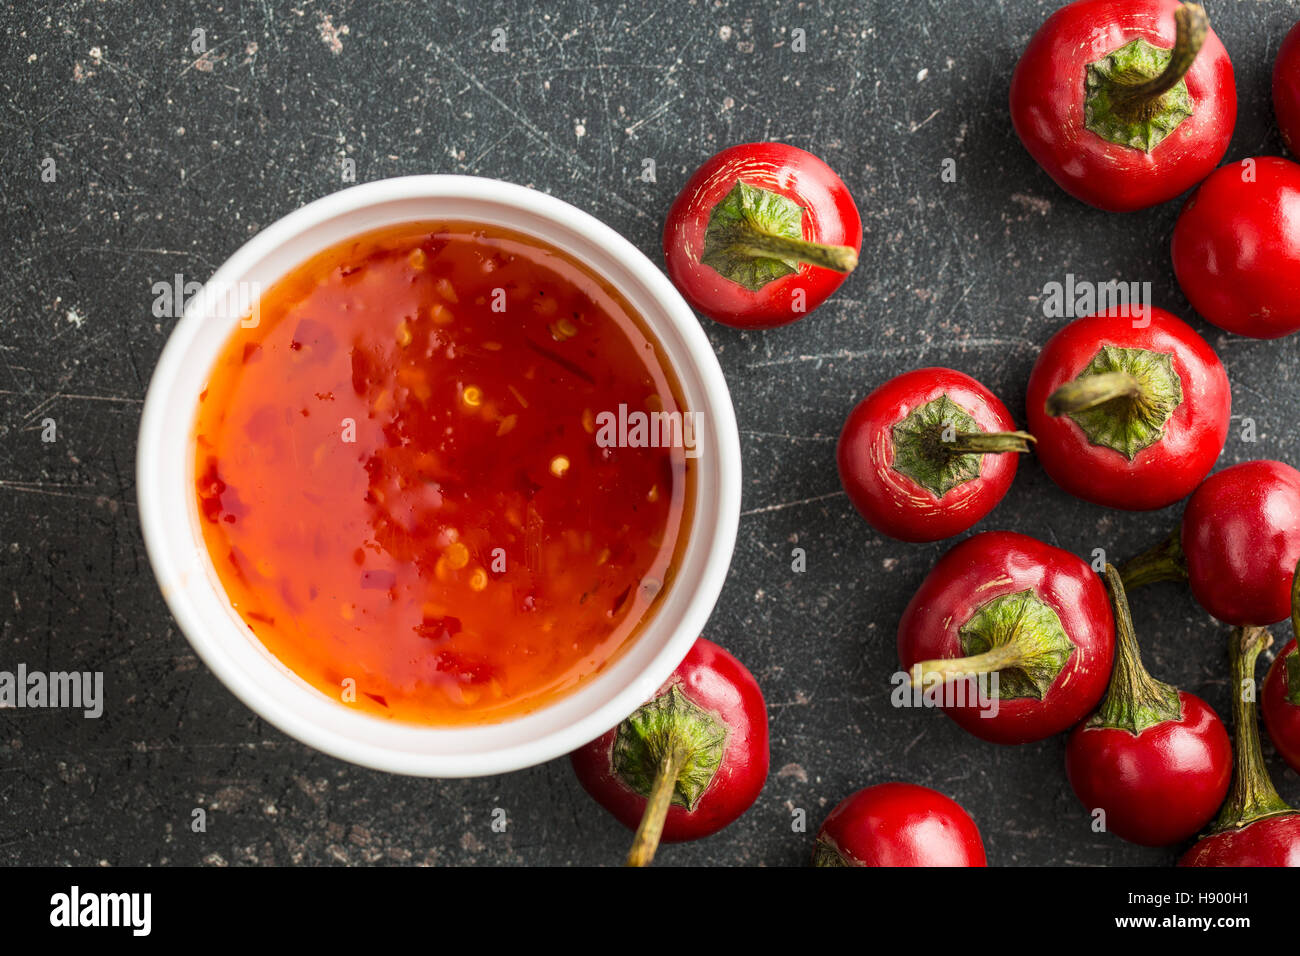 Red chili peppers and chili sauce. Top view. Stock Photo